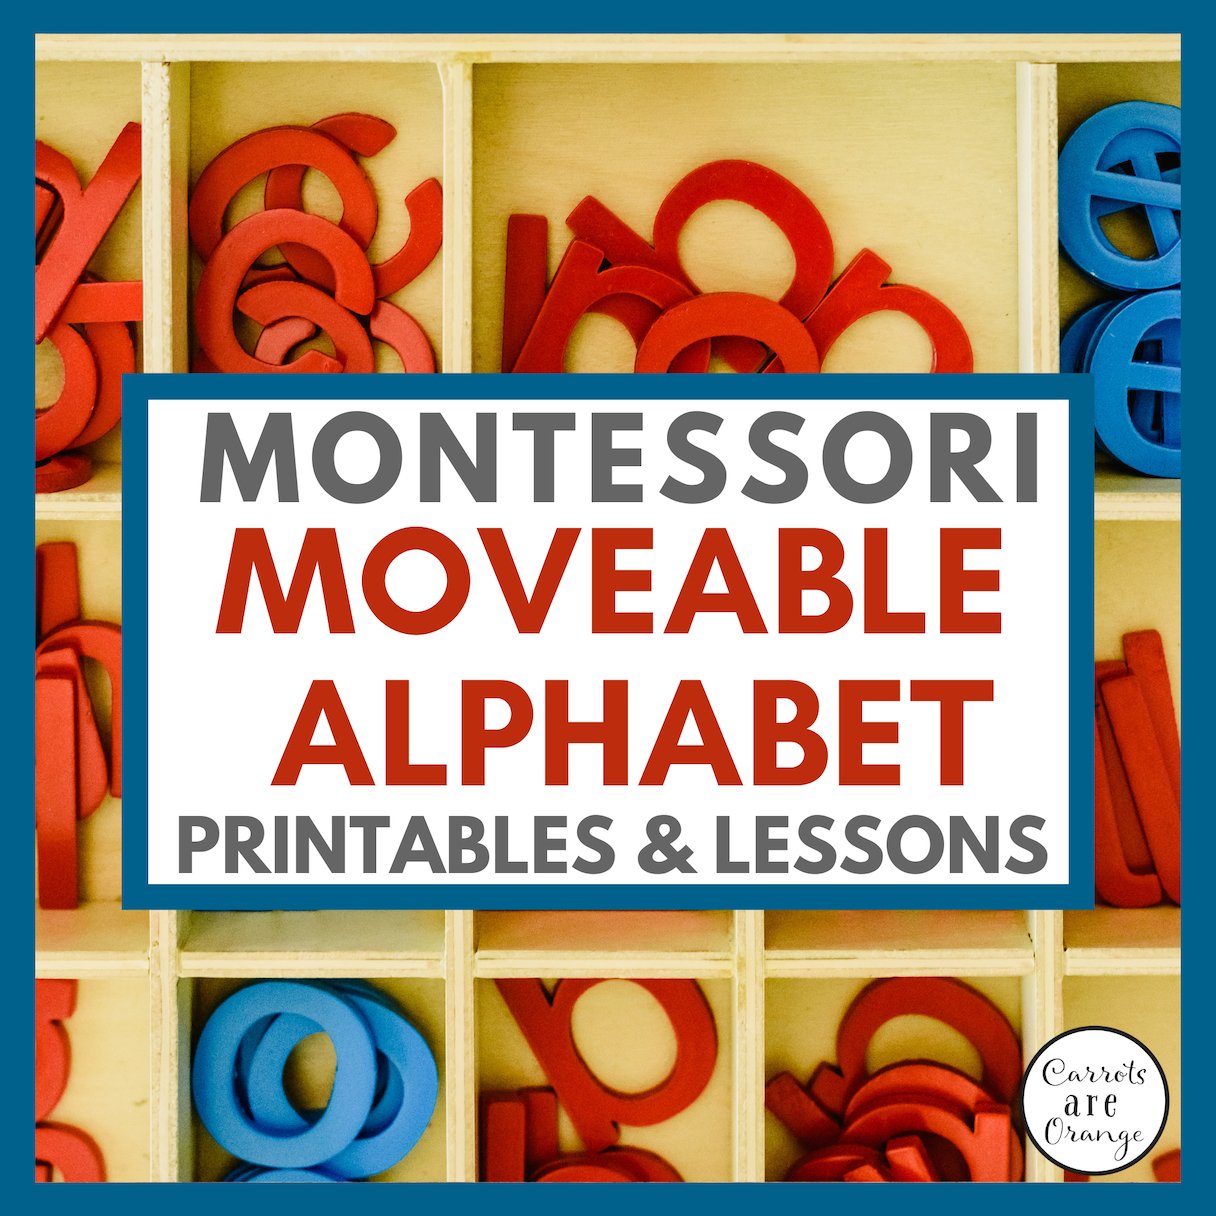 [Language] Printable Moveable Alphabet - Printables by Carrots Are Orange